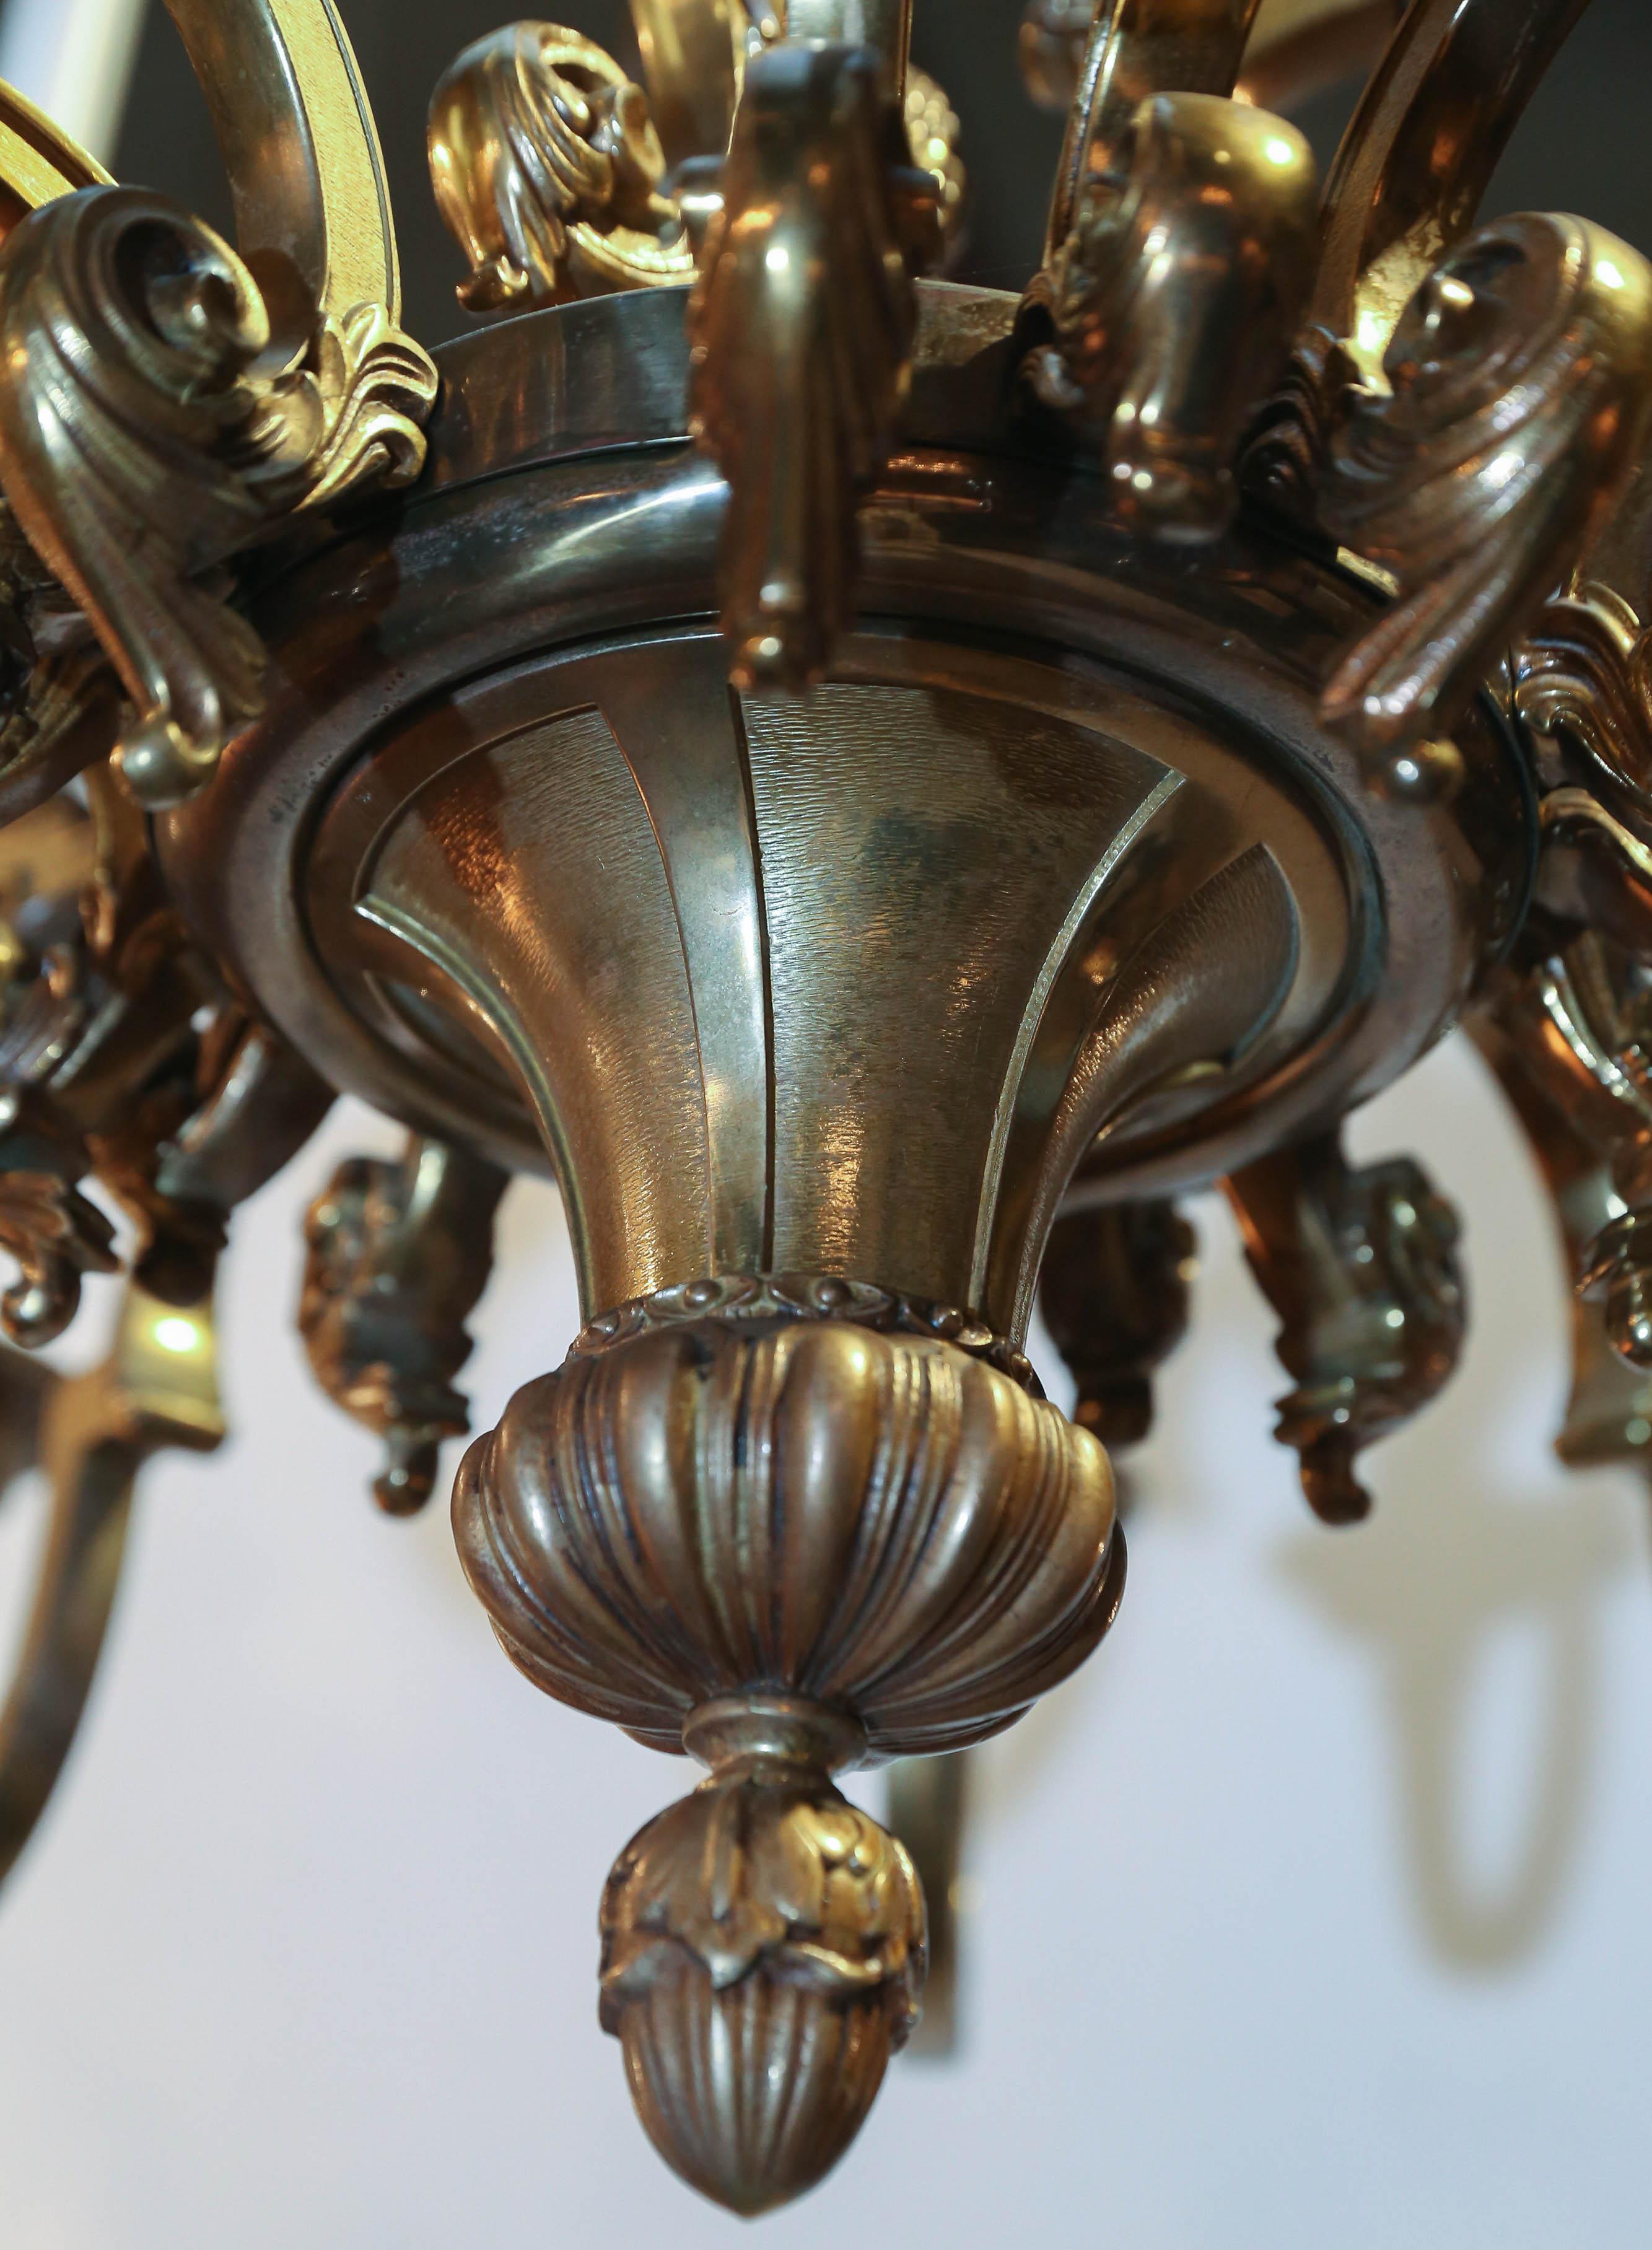 Fifteen-light two-tier neoclassical bronze chandelier has an antique gold finish.
Decorative details include two cherub heads, heavily detailed arms with acanthus designs.
Chandelier also features elaborate bobeche and candleholders, as well as an